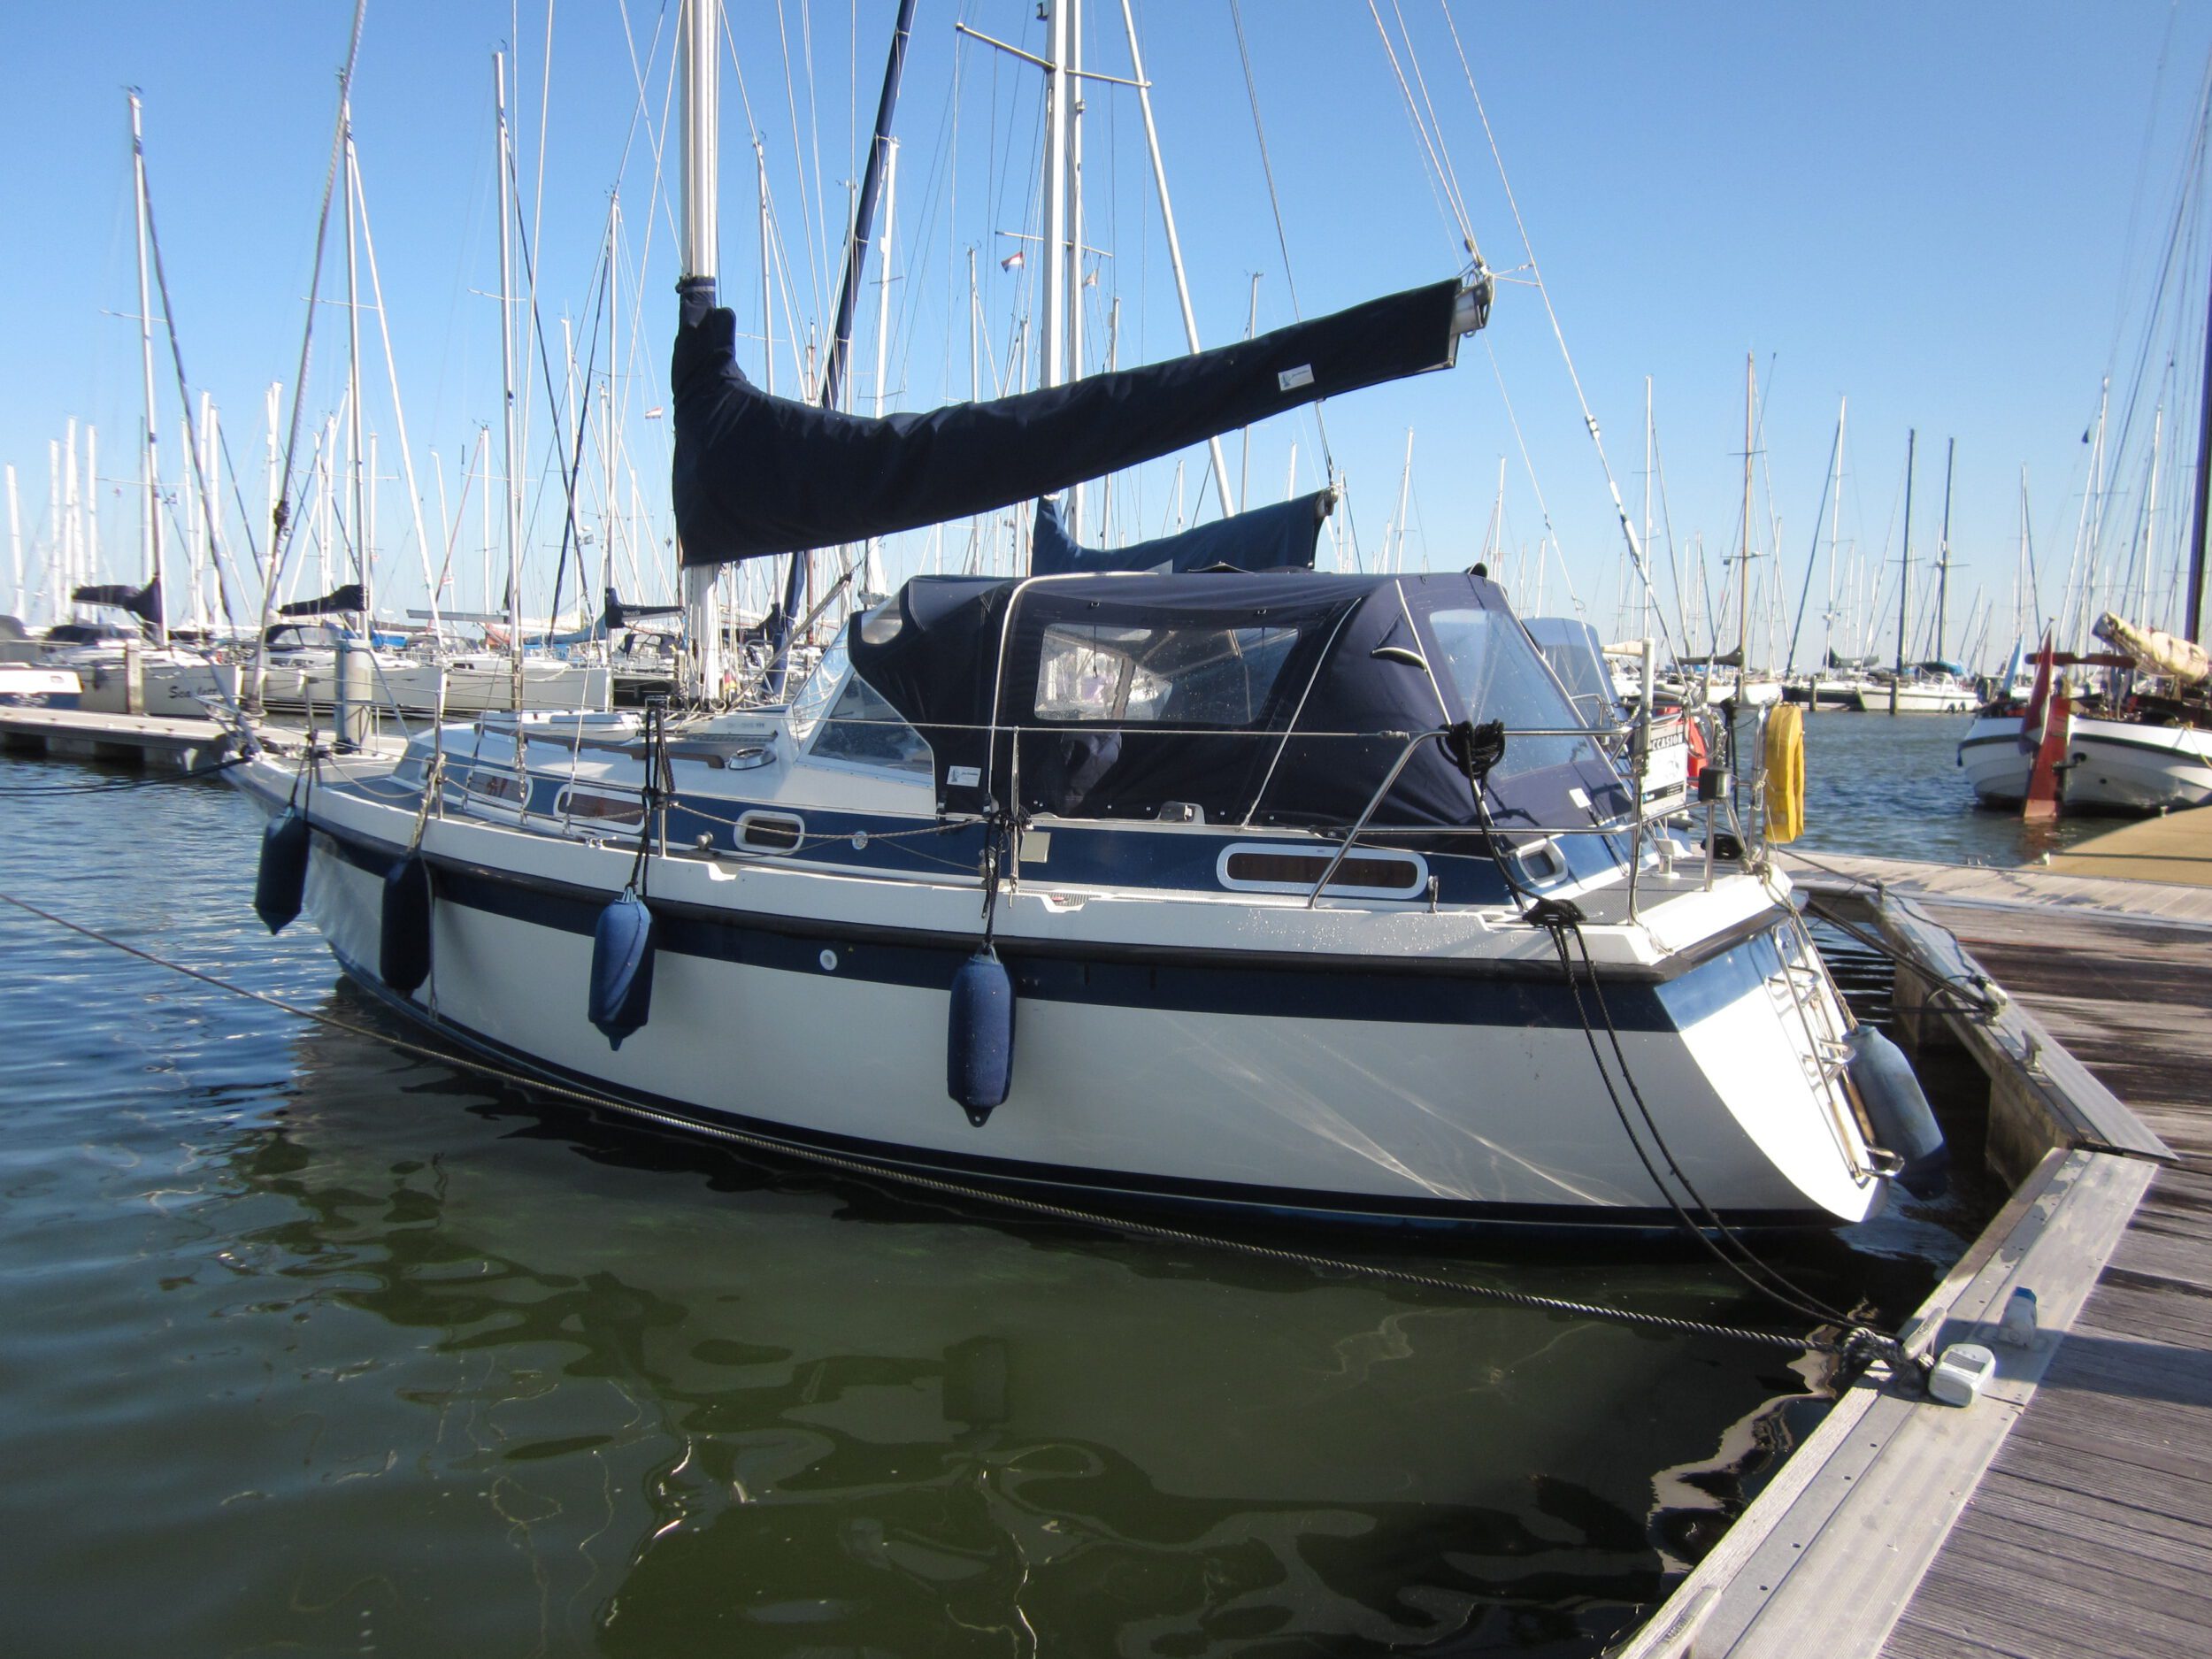 Compromis C999 from 1995 for sale. 1,50 draft, 13.60 airdraft. Nice boat - C -Yacht